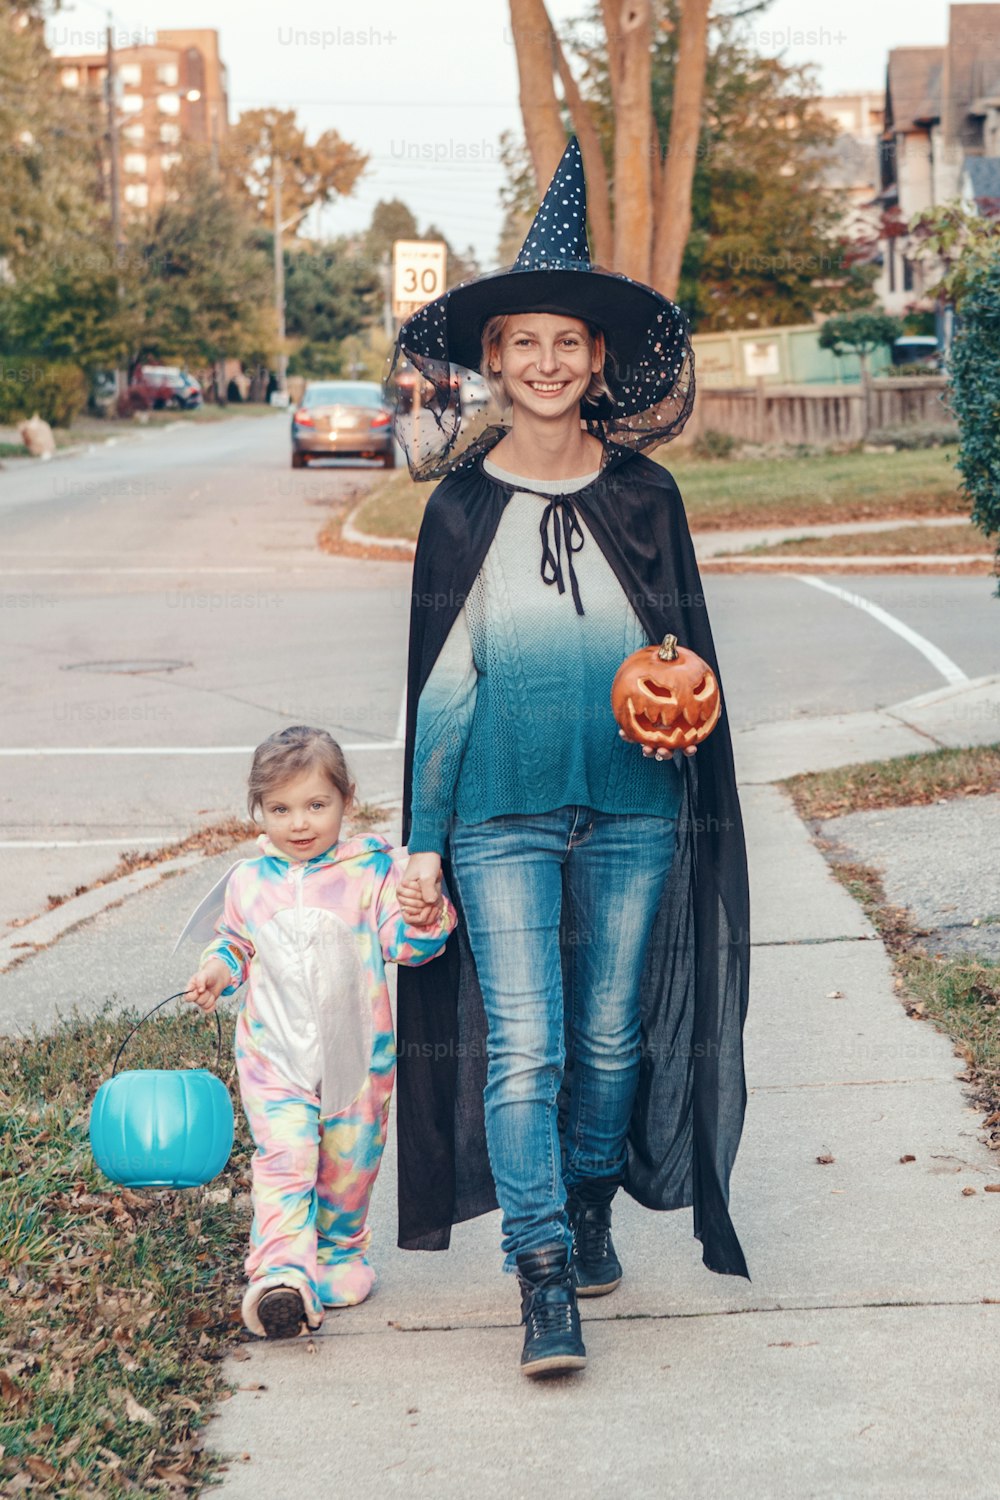 Trick or treat. Mother with baby toddler girl going to trick or treat on Halloween holiday. Mom with kid child in party costumes with basket going to neighbourhood houses for candies, treats.